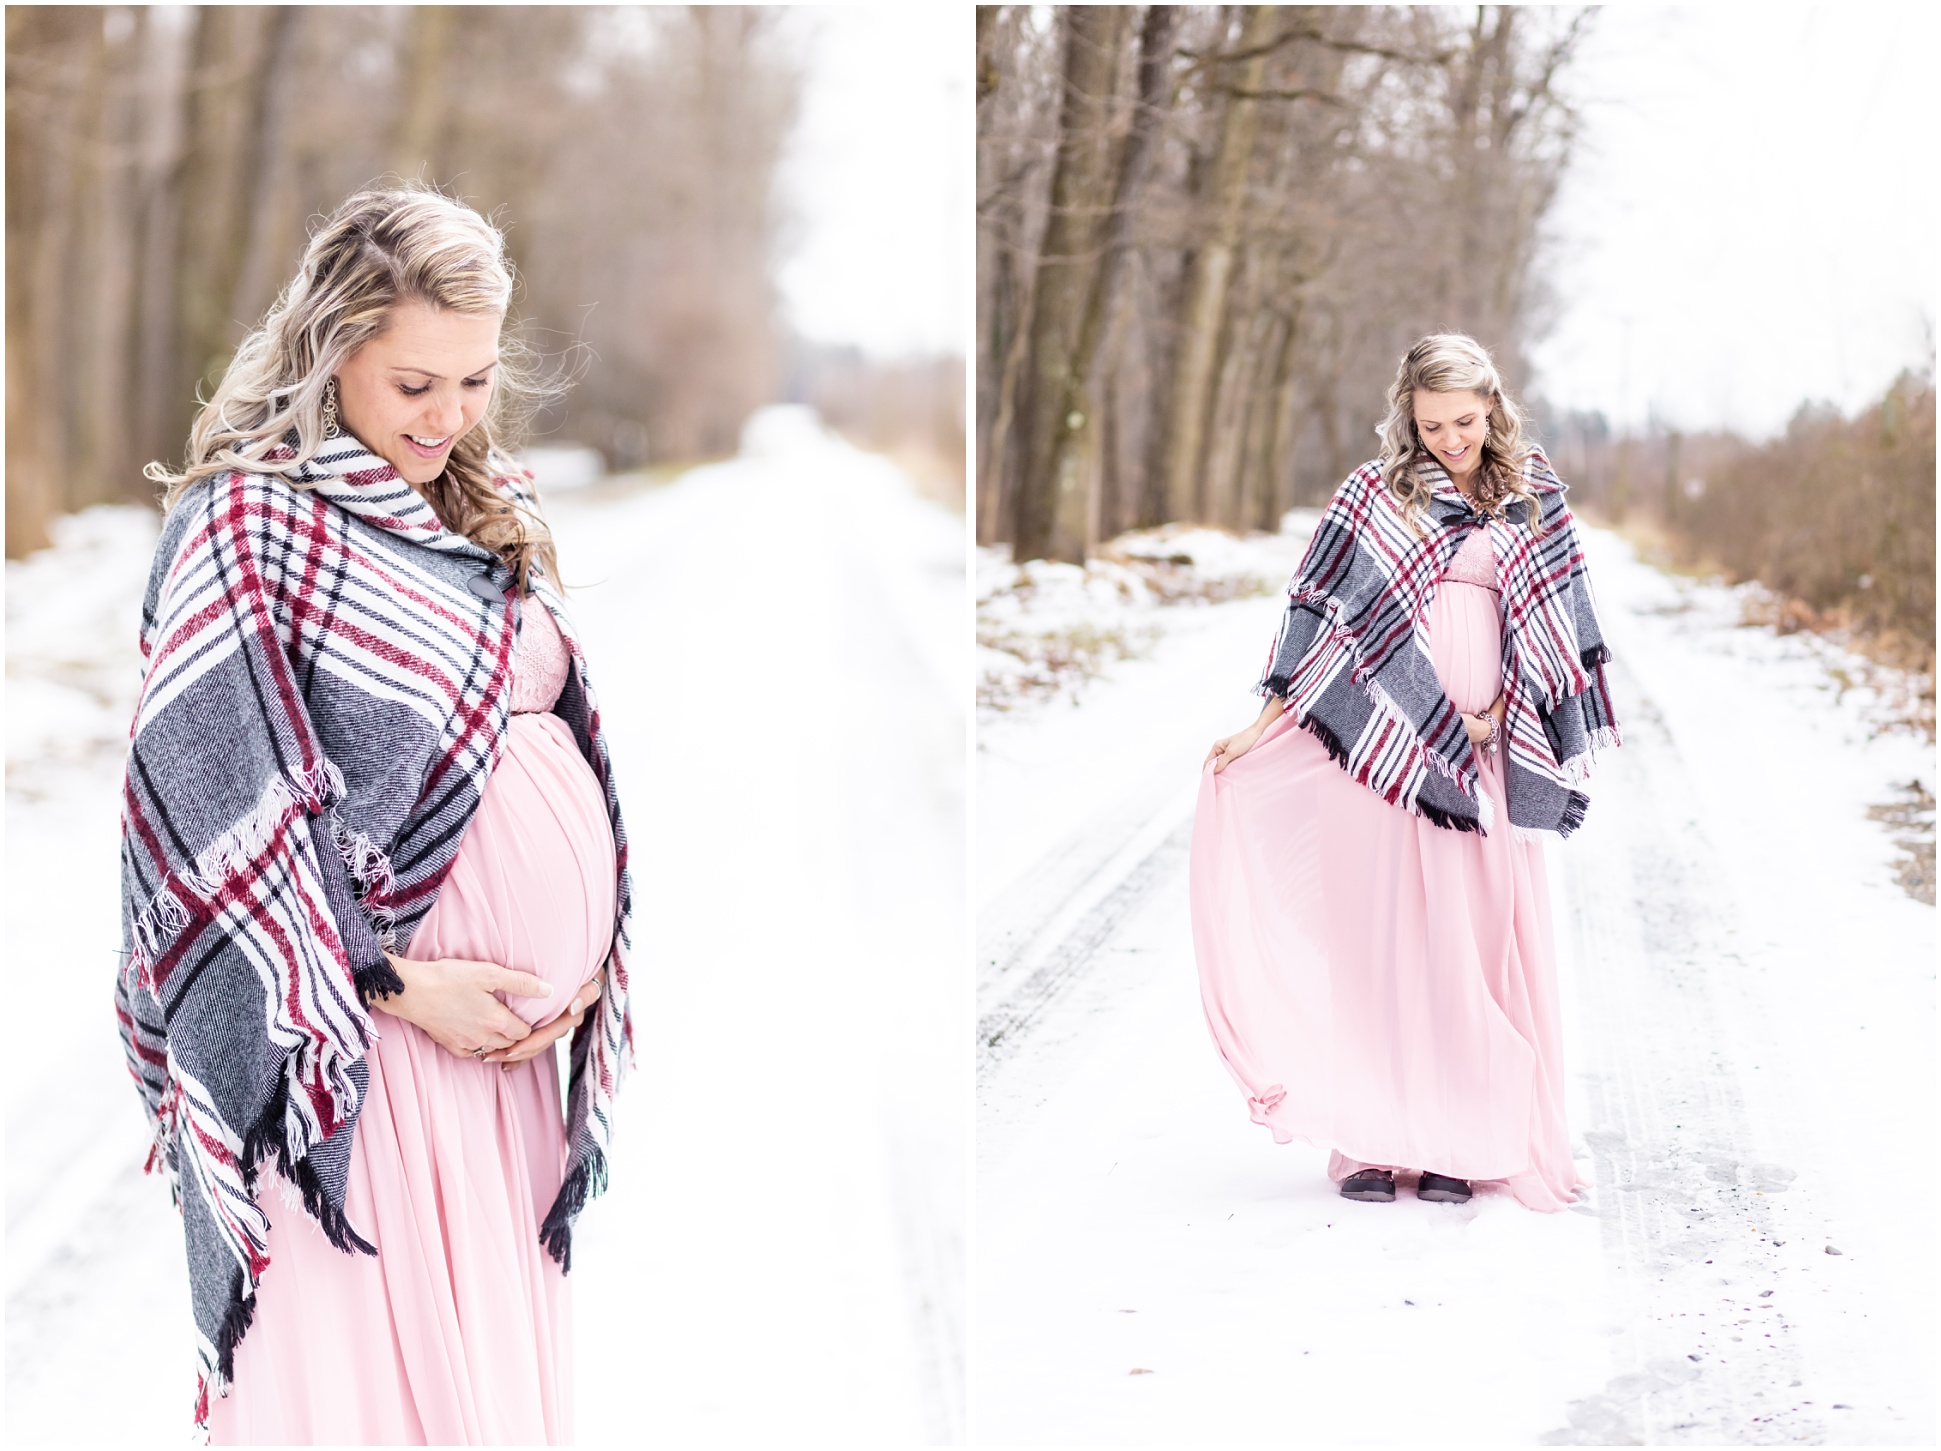 Two images of a pregnant woman on a snowy lane